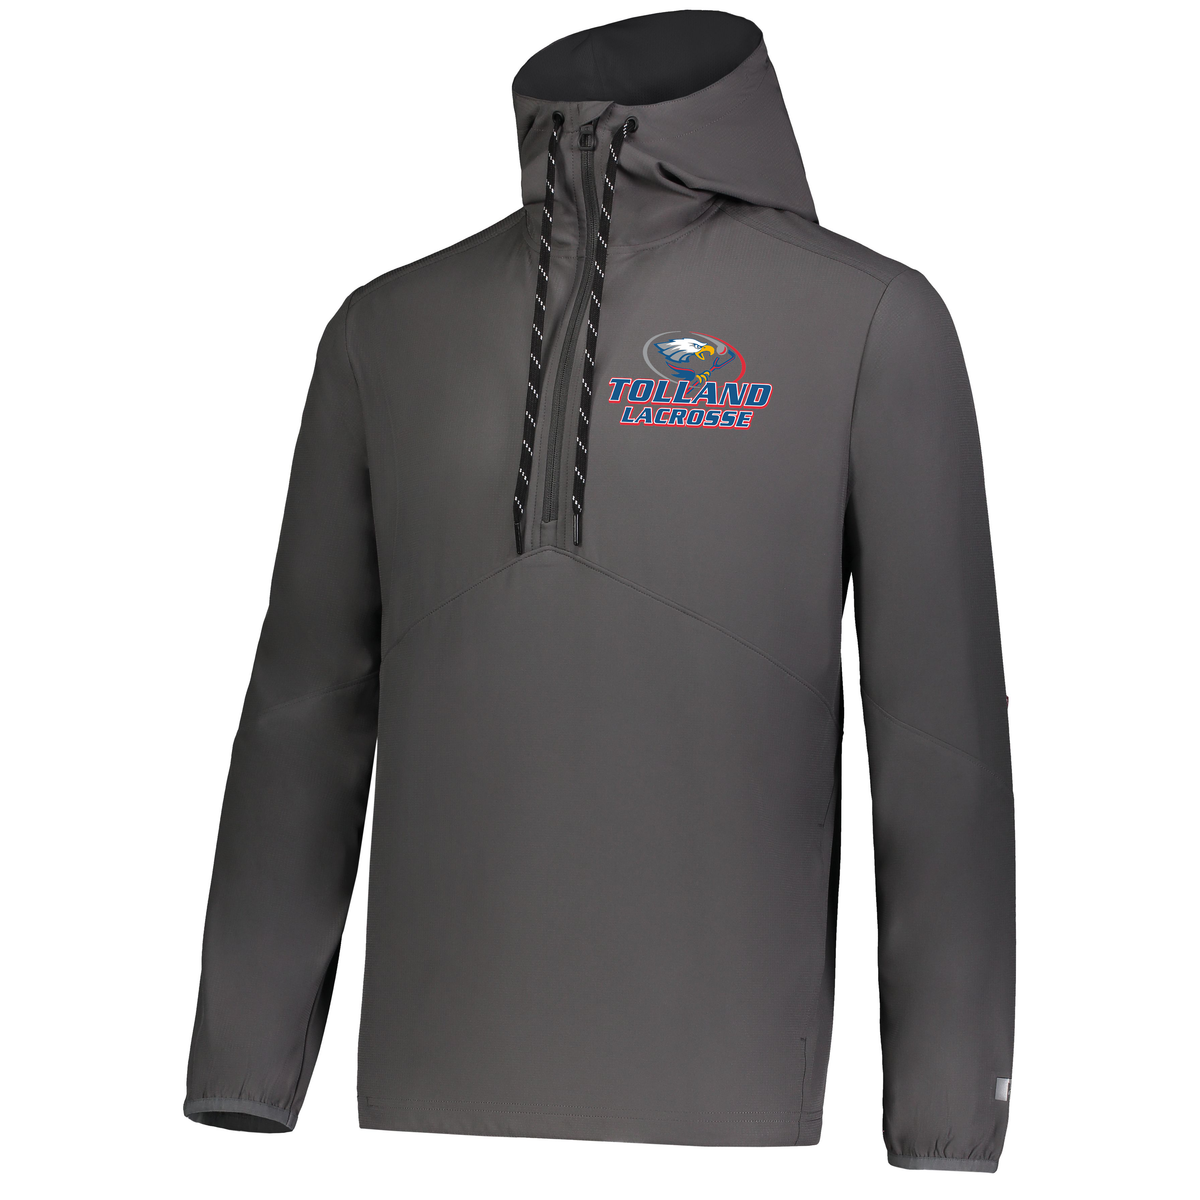 Tolland Lacrosse Club Legend Hoooded Pullover